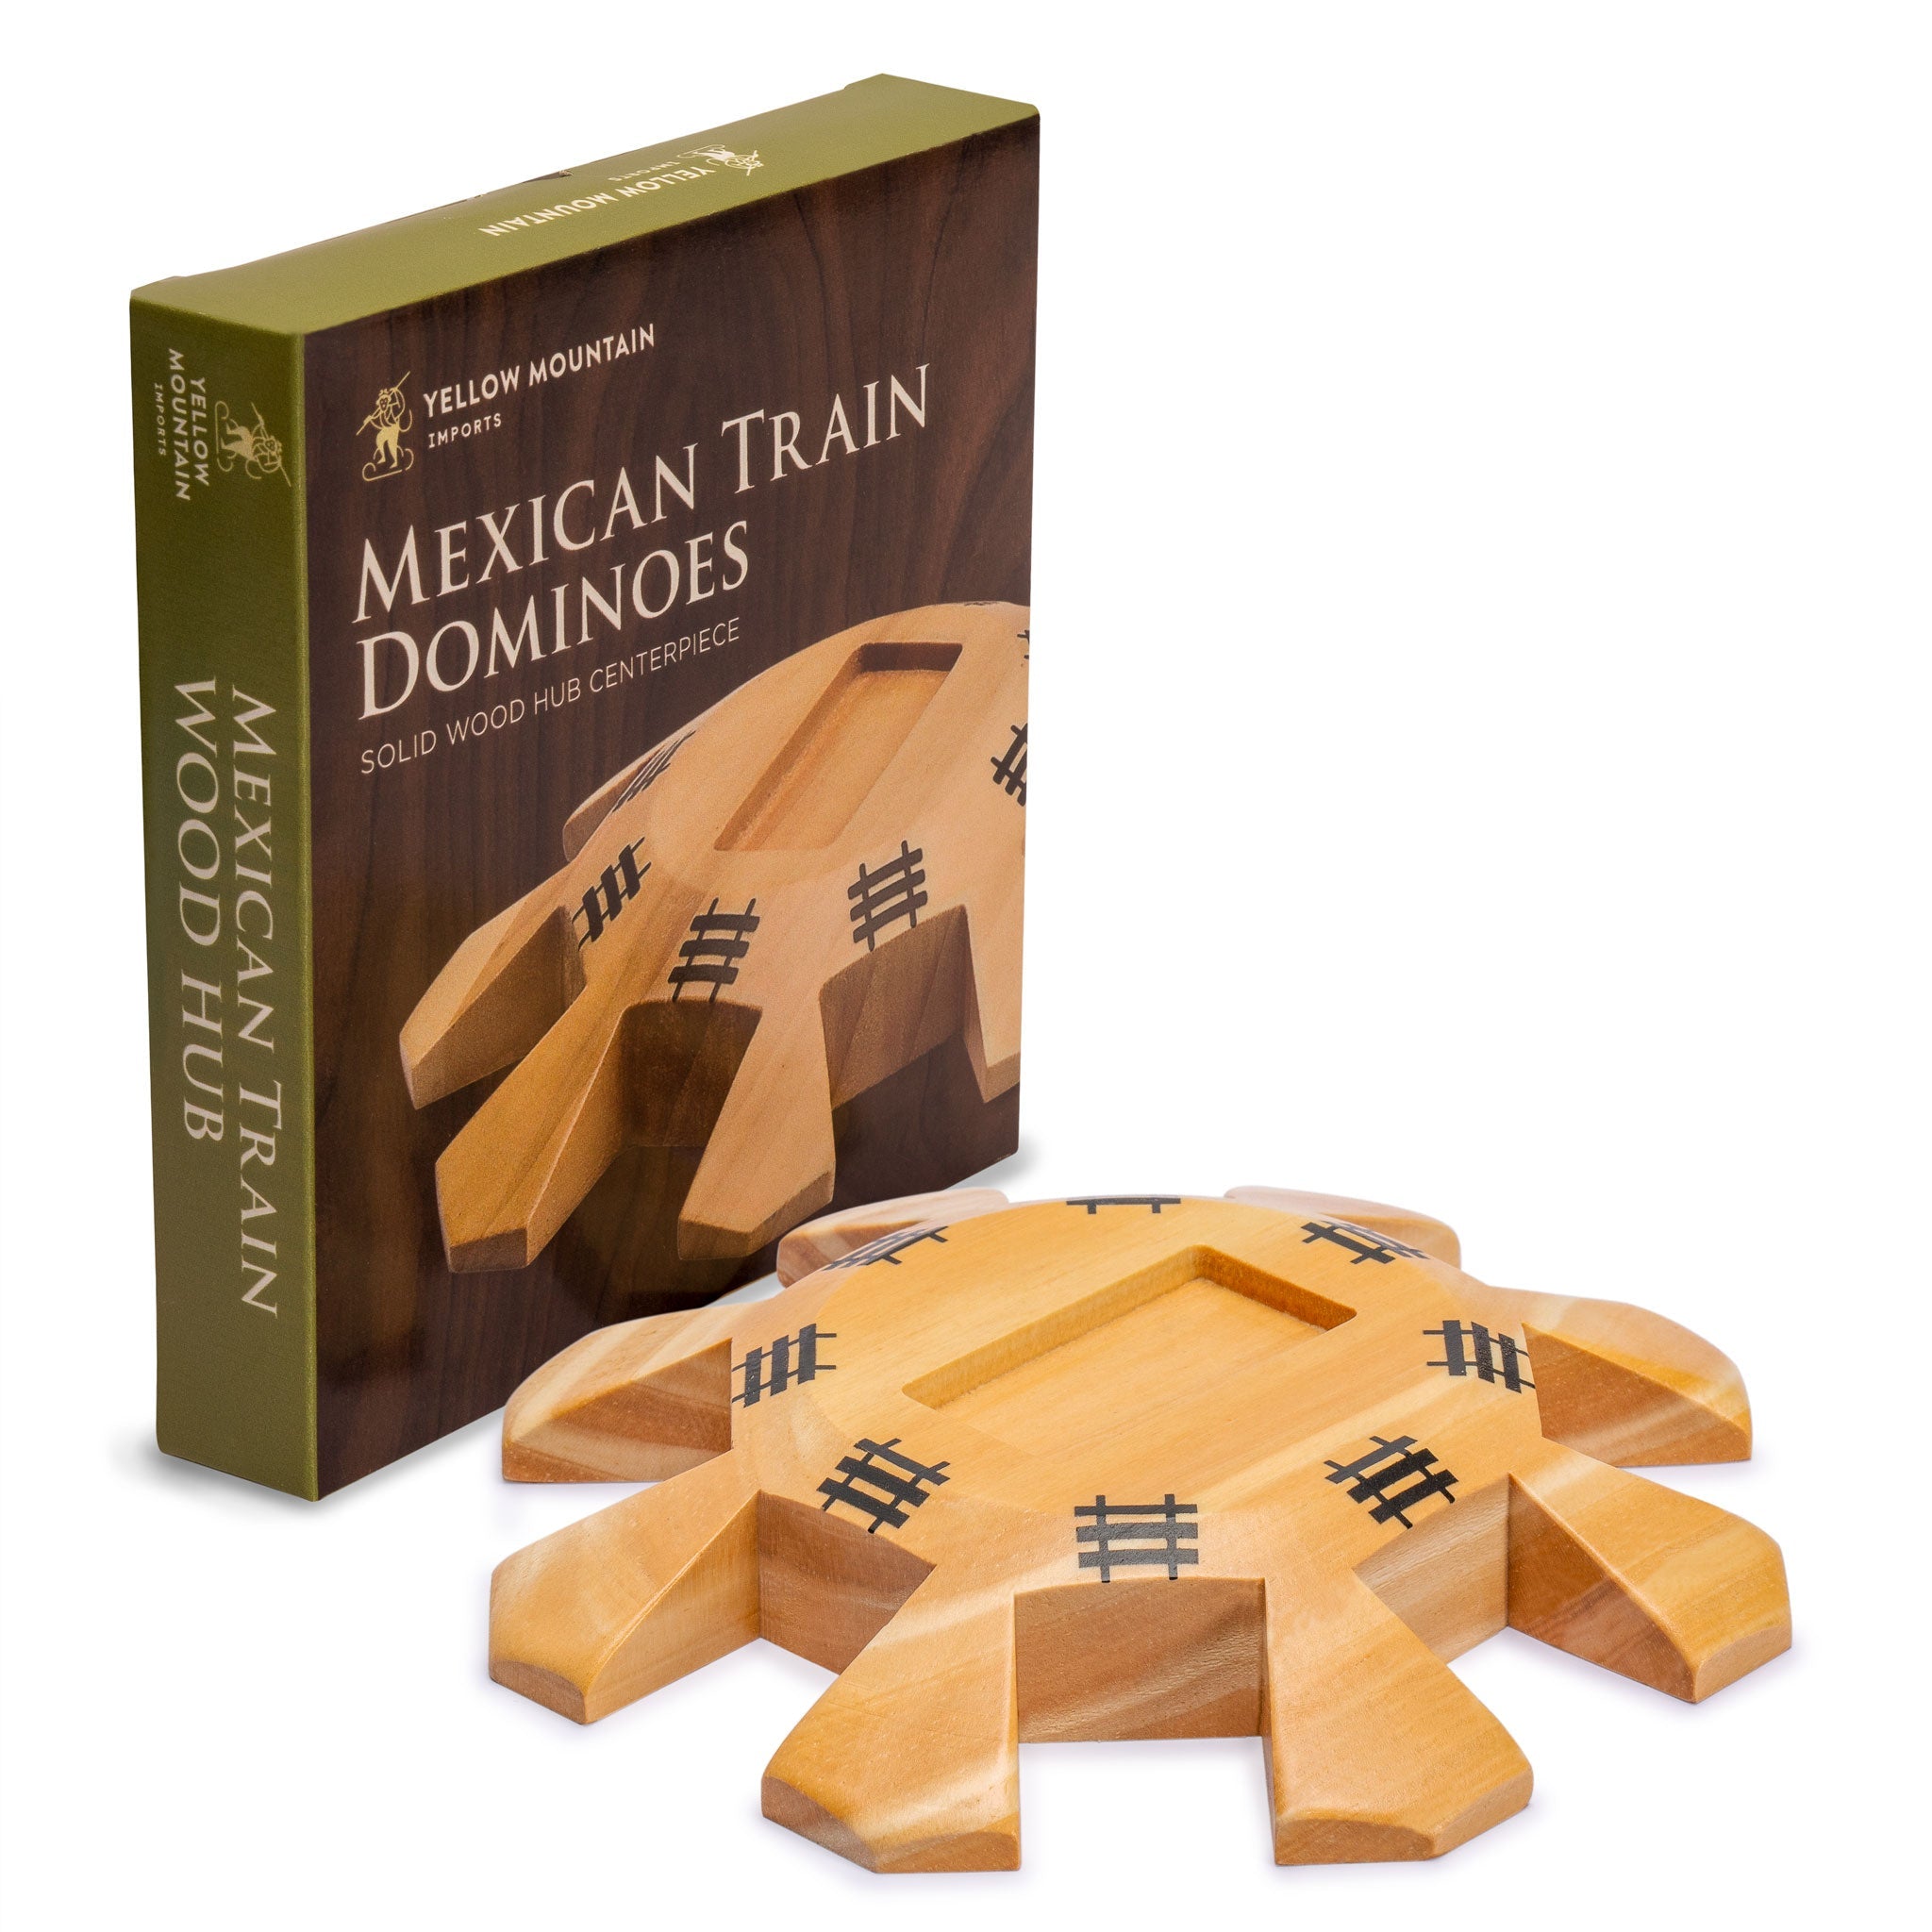 Wooden Hub Centerpiece for Mexican Train Dominoes Game (up to 8 Players) -  5.8